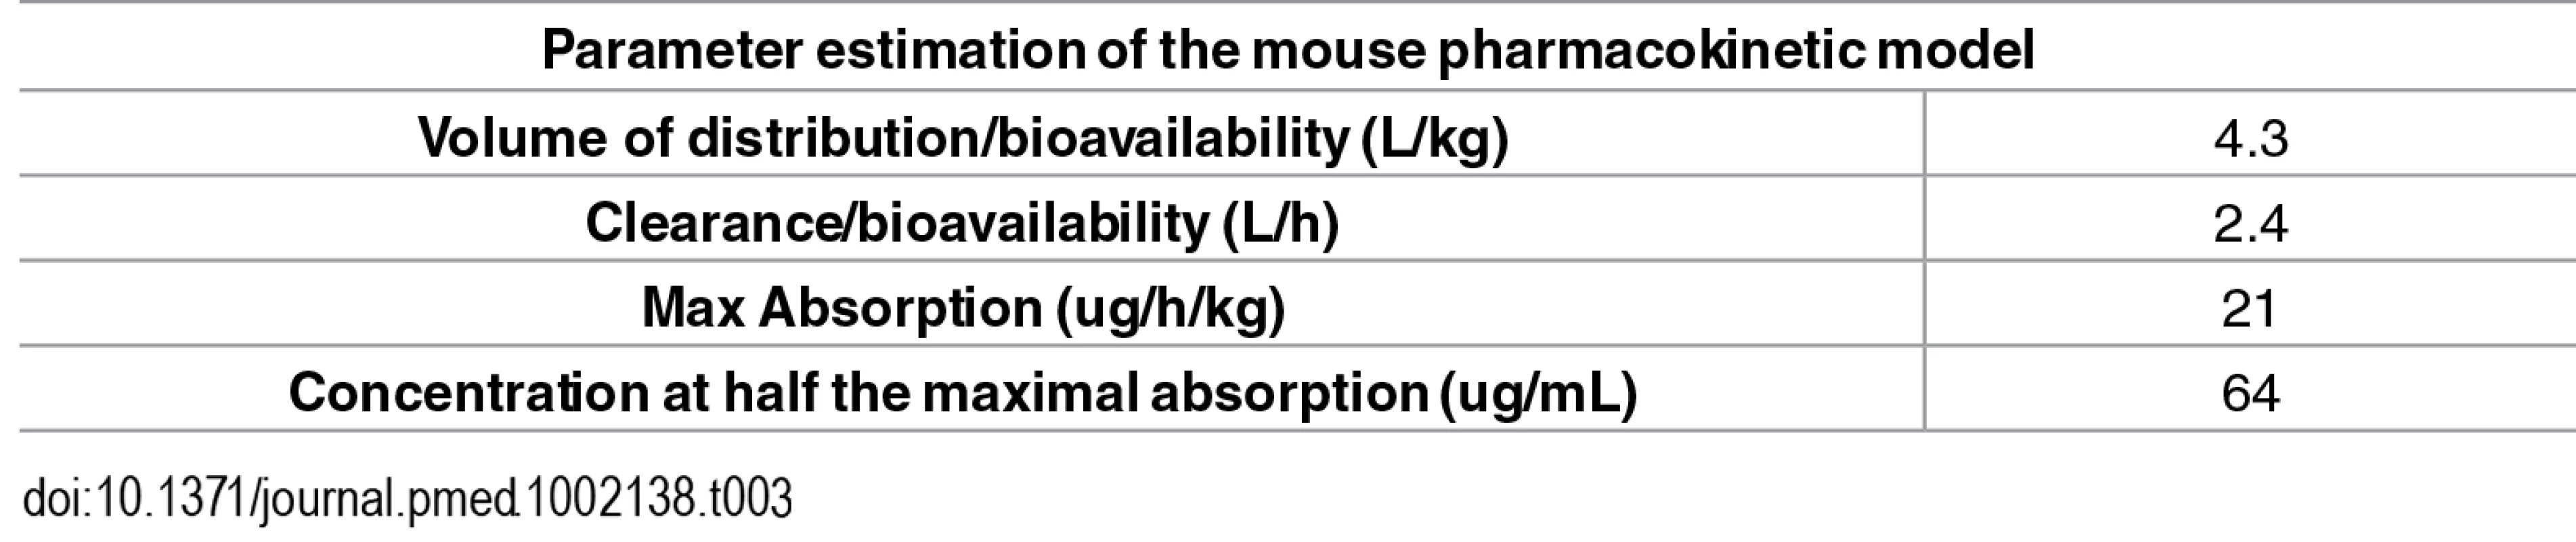 Parameterization of the pharmacokinetic model.